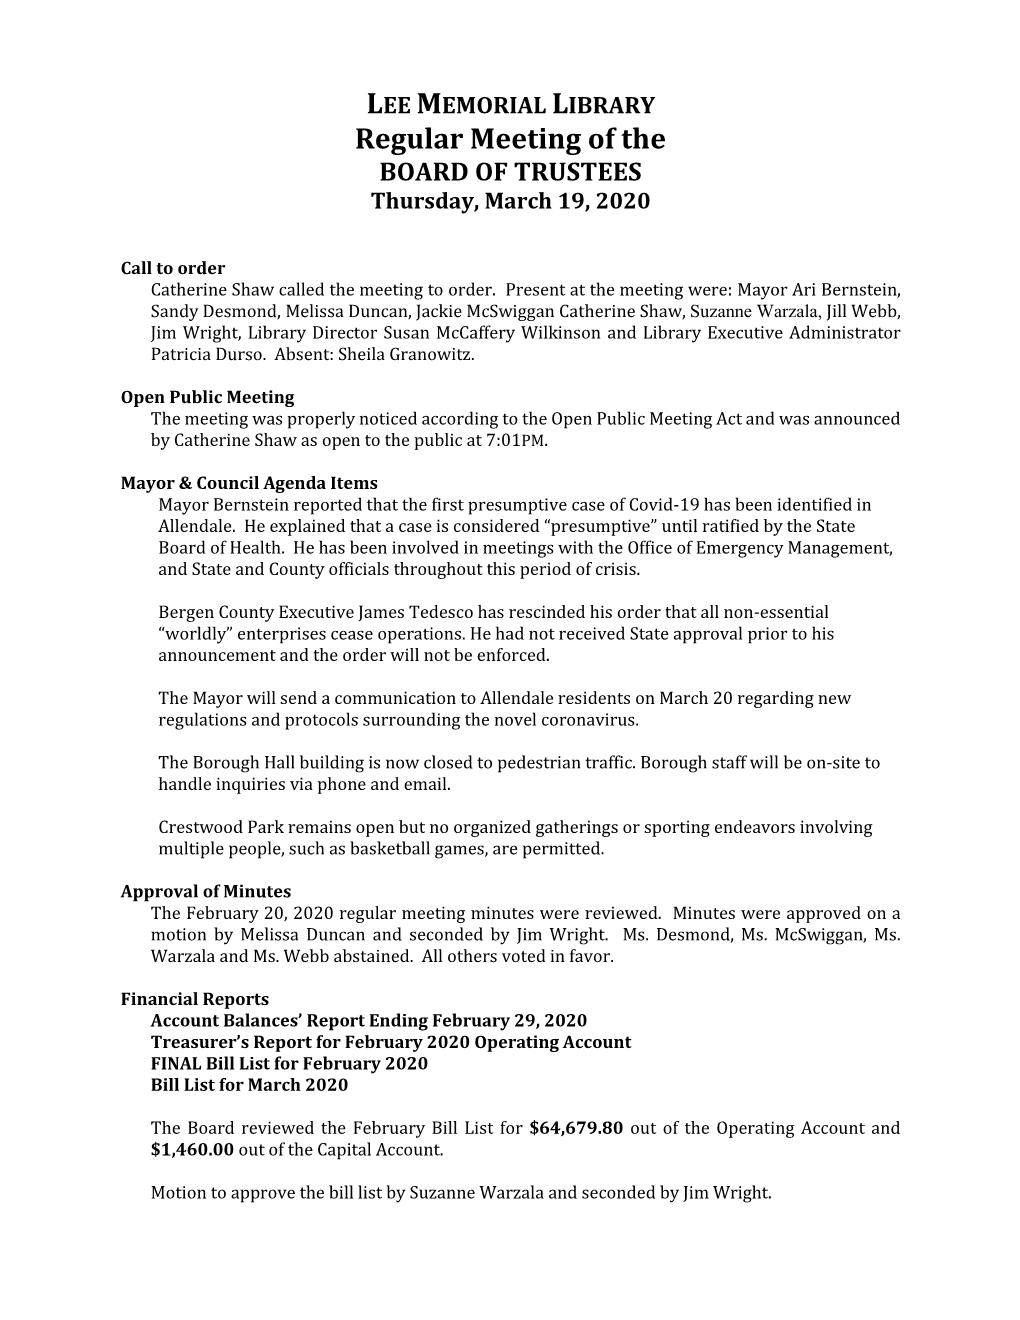 Regular Meeting of the BOARD of TRUSTEES Thursday, March 19, 2020